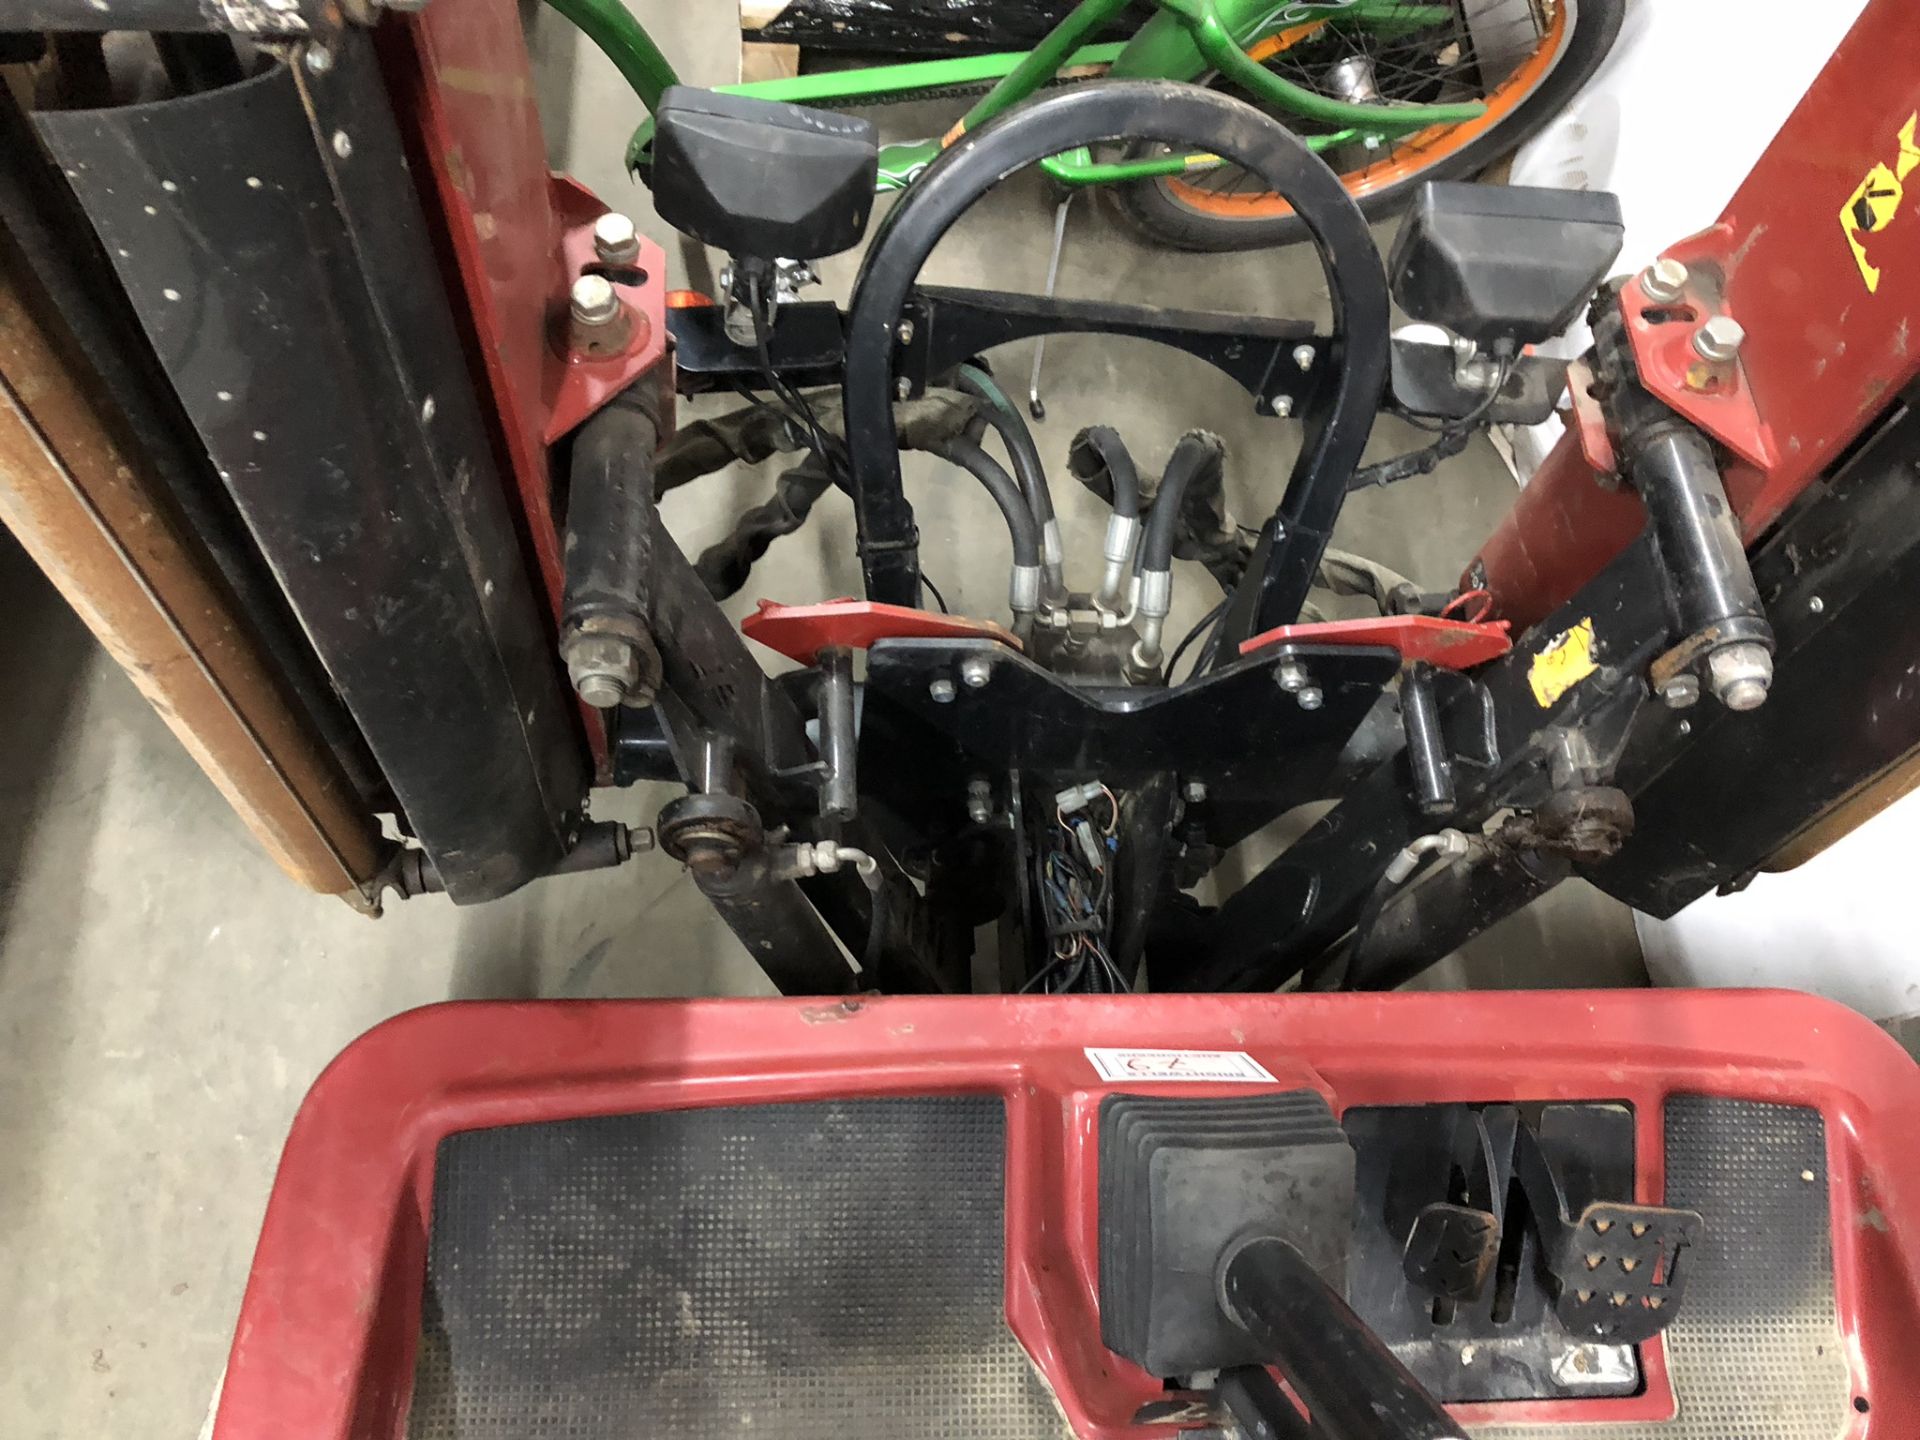 Toro CT2140 Ride-On Mower - EU11 AOL - With 3 x Cutting Blades | Hours: 3363.0 - Image 5 of 5